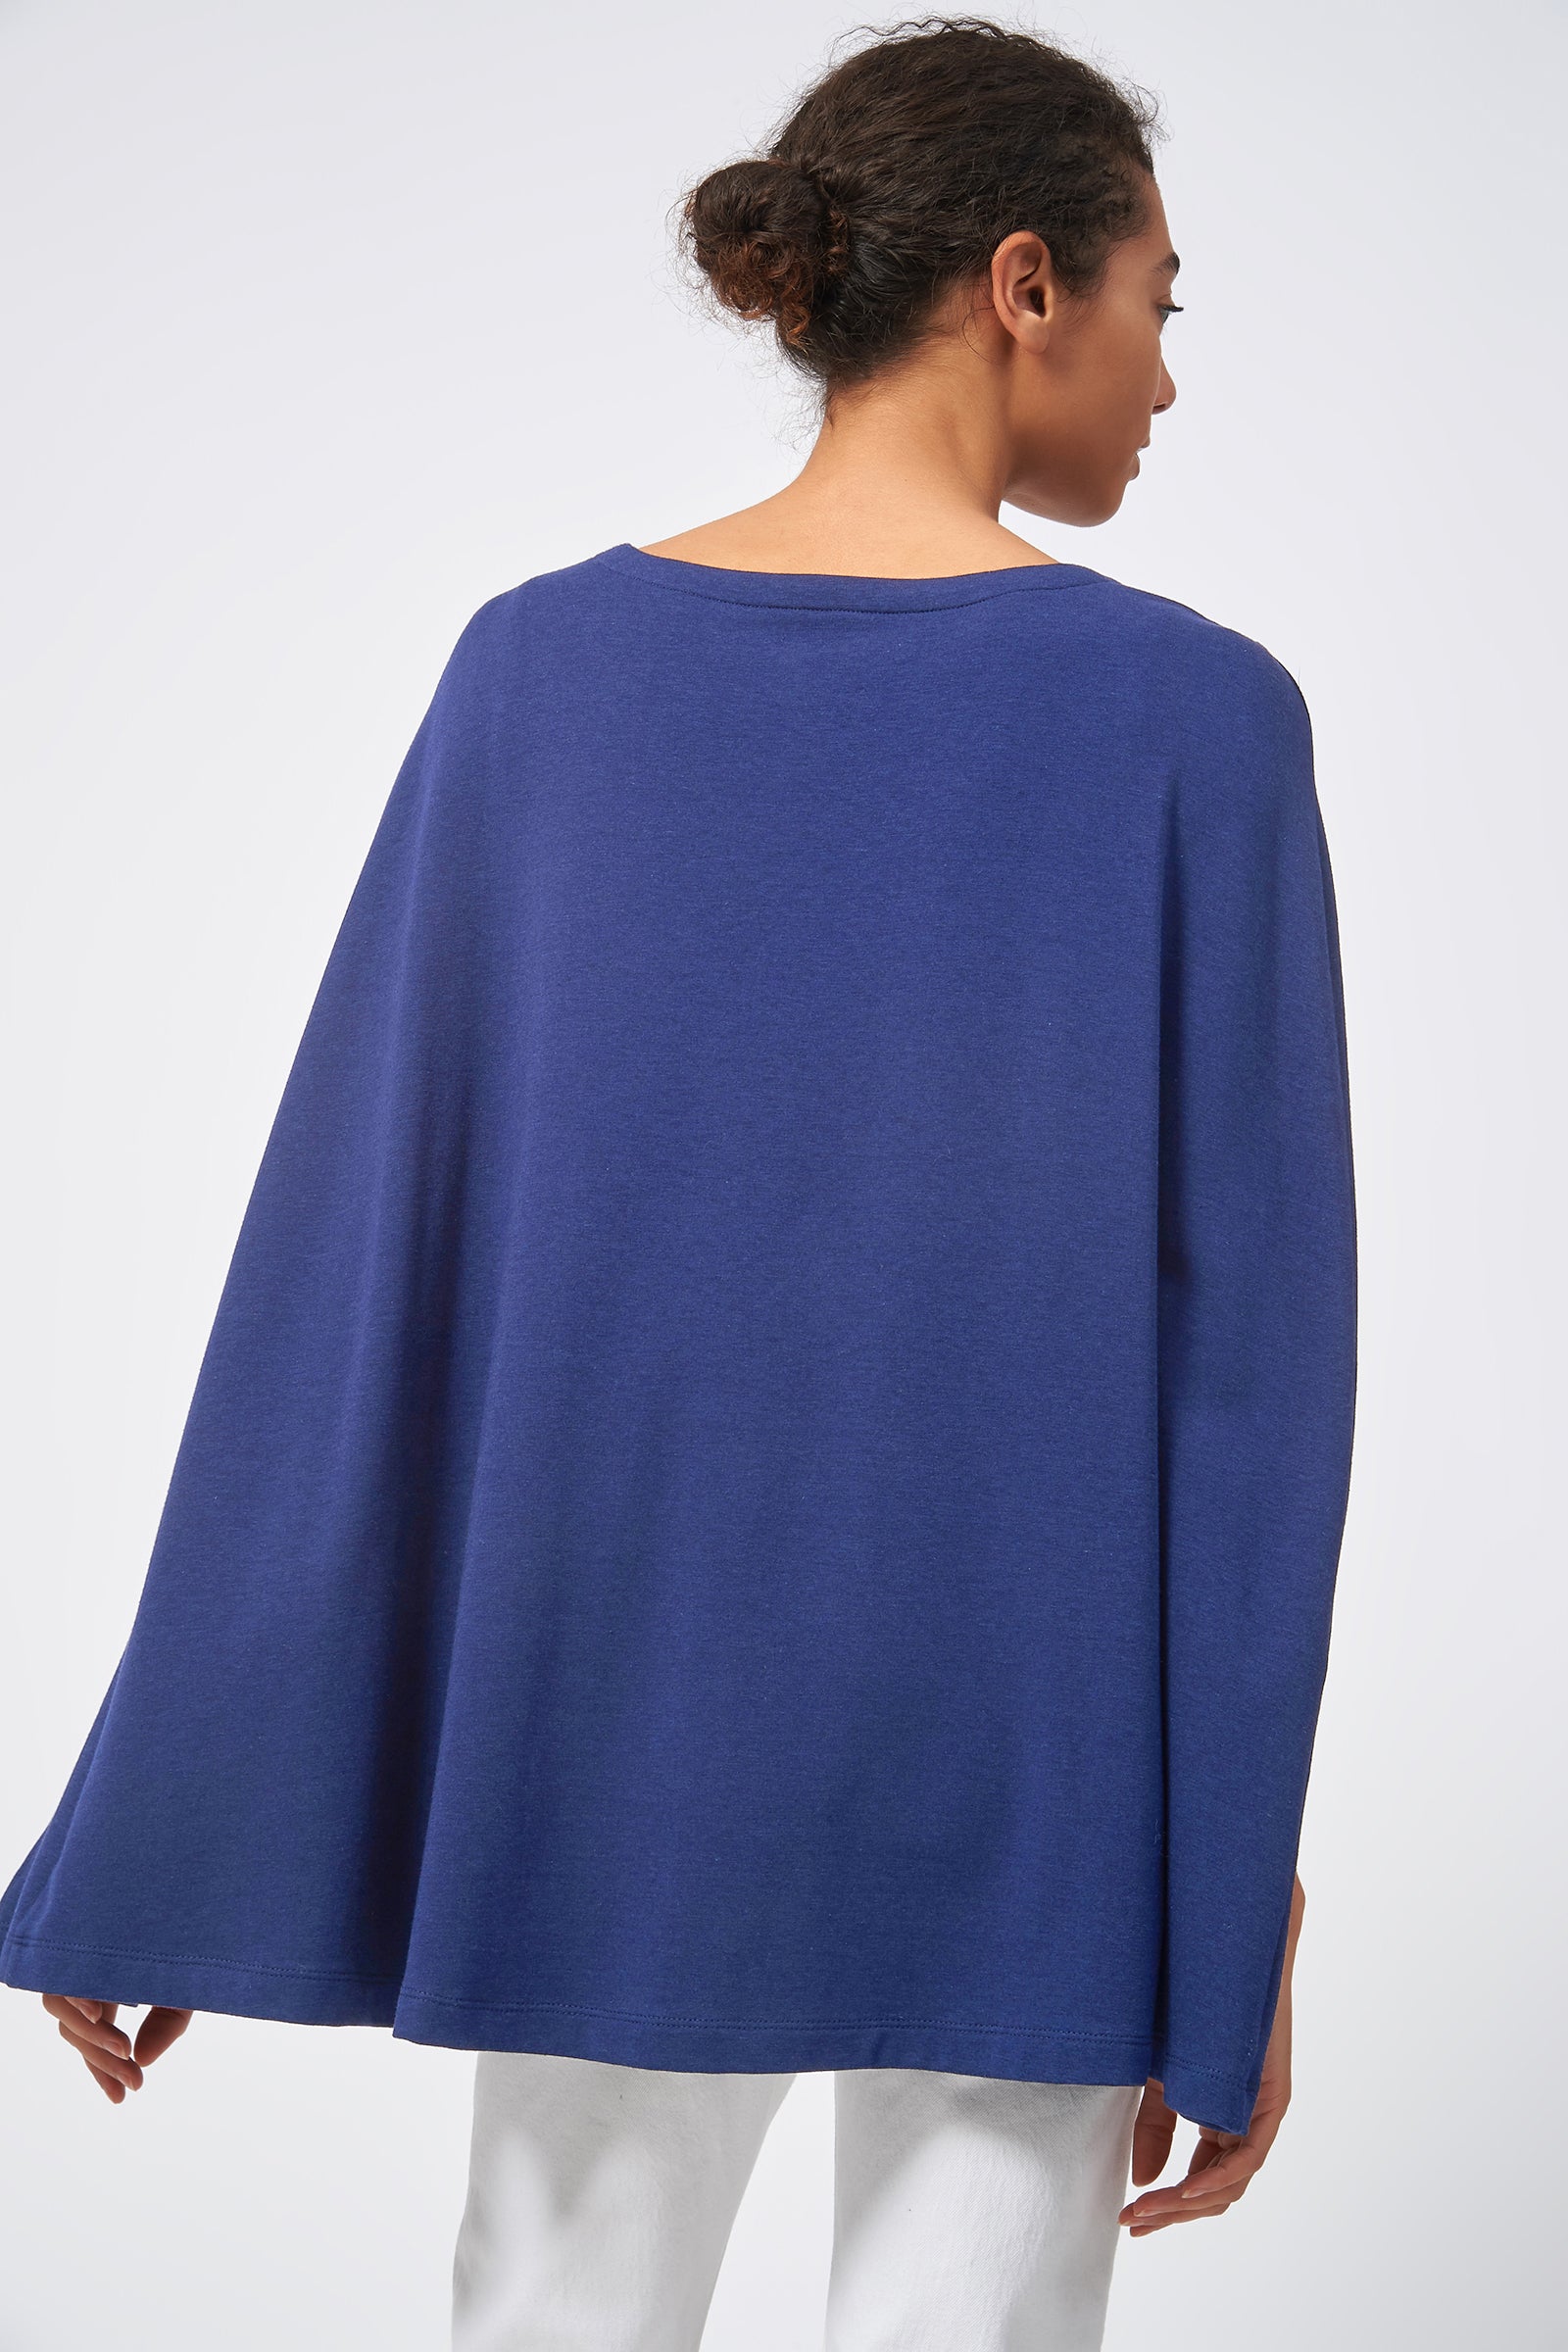 Kal Rieman Cape Sweatshirt in Bamboo Terry Blue image of the main side view